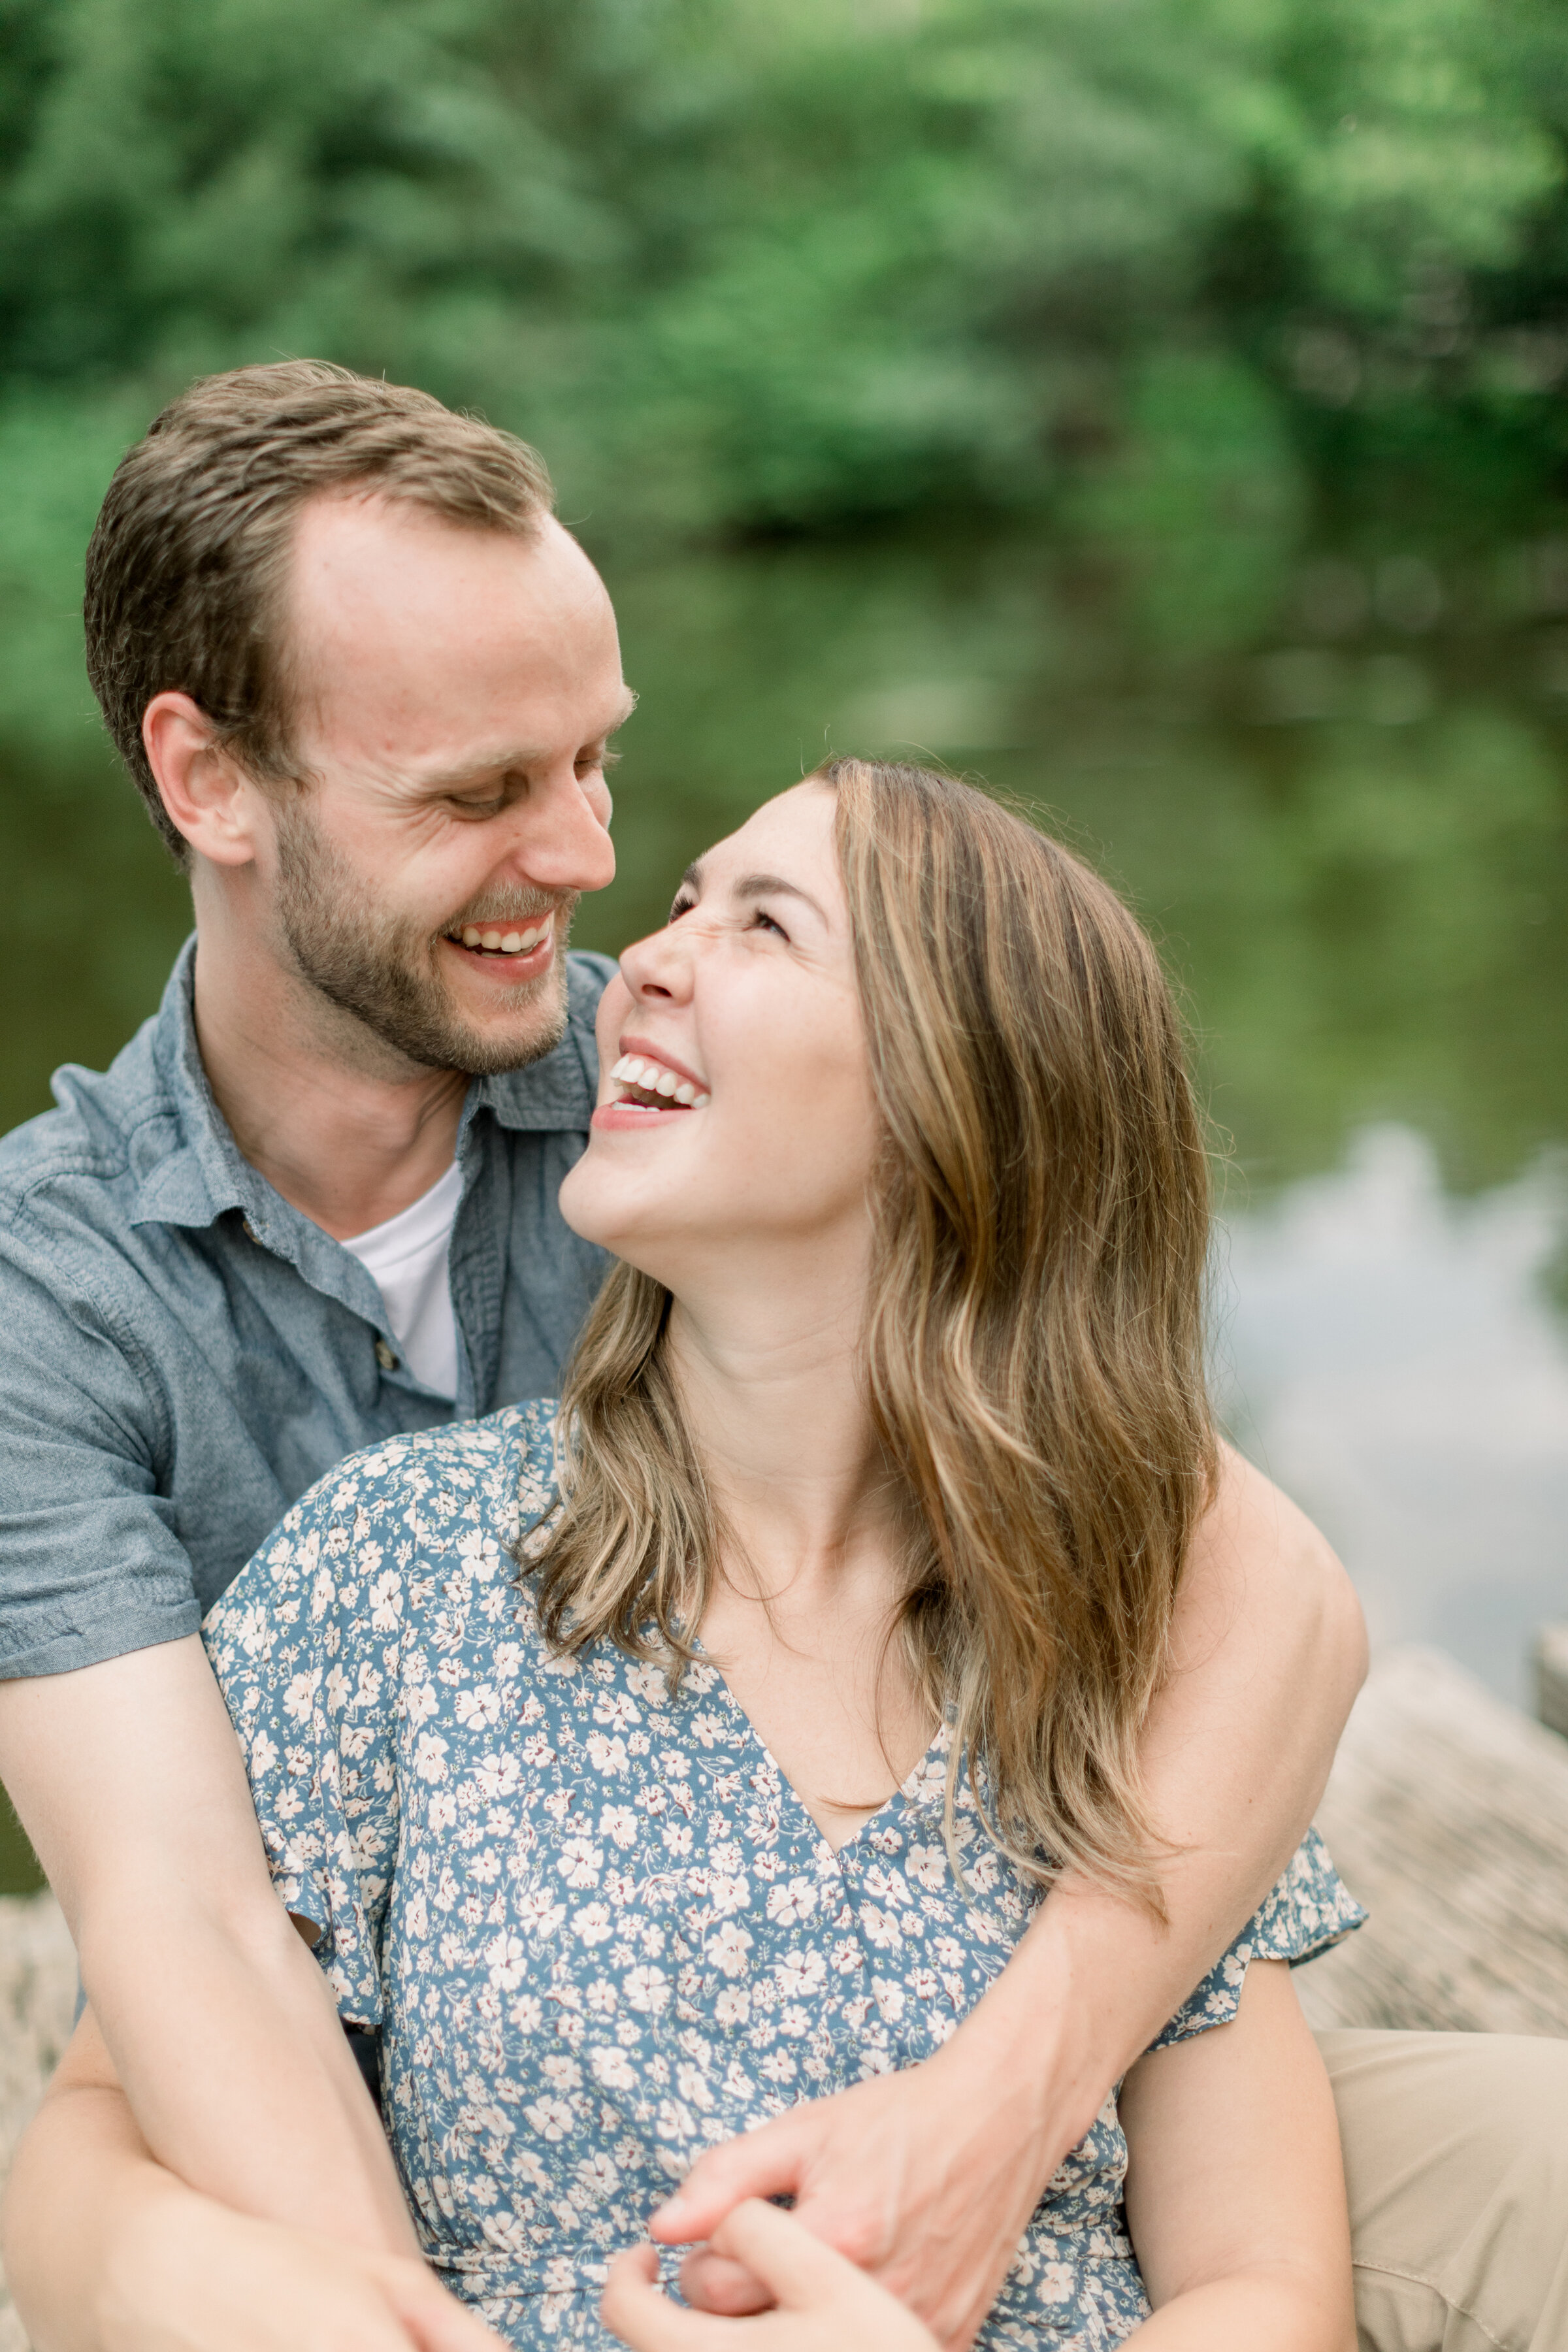  Beautiful couple with simple summer engagement photoshoot outfit inspo in blue and white by Chelsea Mason Photography in Ottawa, ON. outfit inspo for couples best outfits for engagements what colors to wear for summer engagements how to style for en